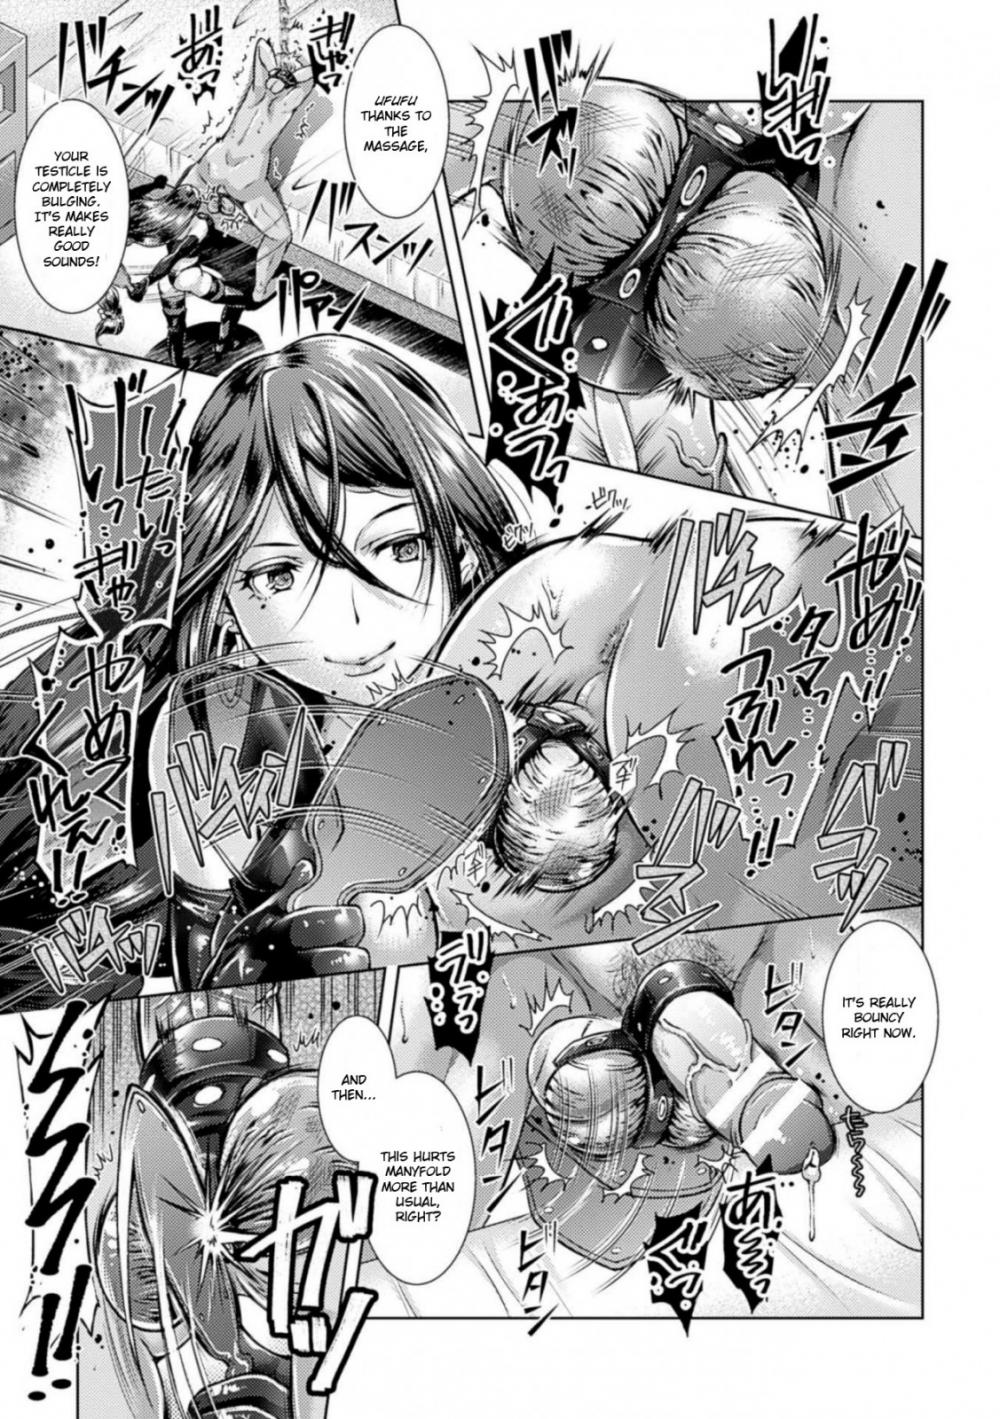 Hentai Manga Comic-Catch Ball (The Heroines Who Play With Balls Like Their Playthings And Use Ejaculation Control Vol. 1)-Read-12